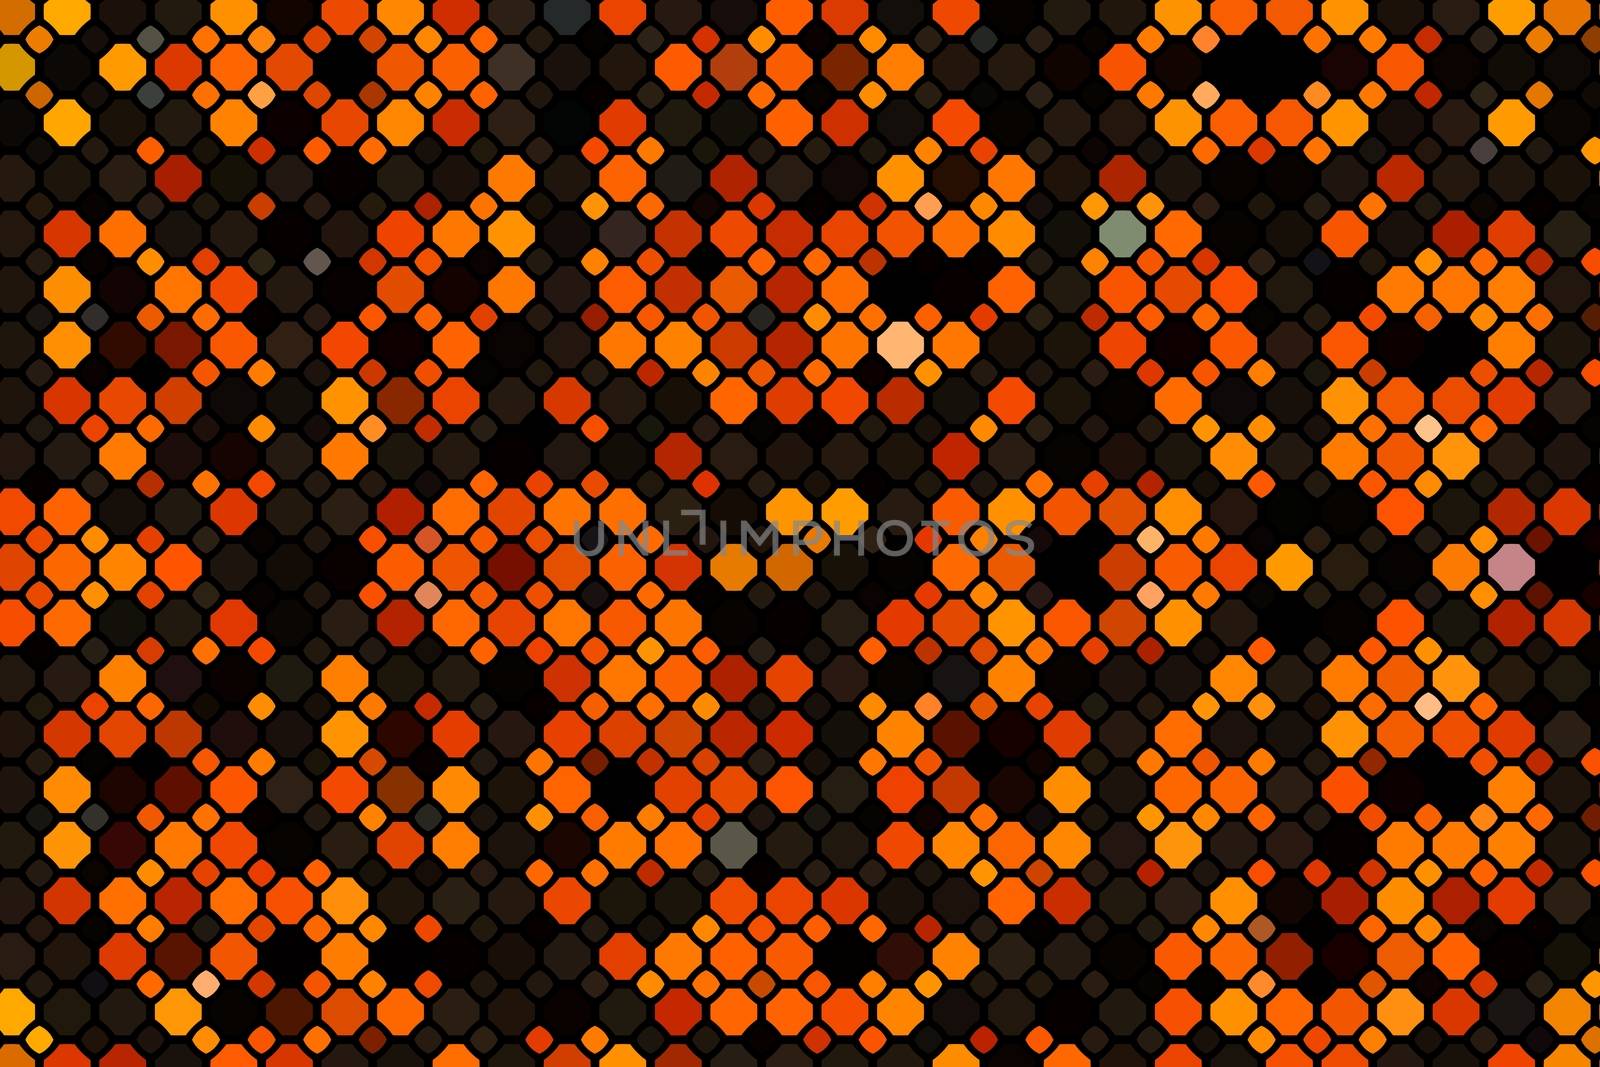 The Dark Orange vector layout with circle shapes. Illustration with set of shining colorful abstract circles. Pattern for beautiful websites.